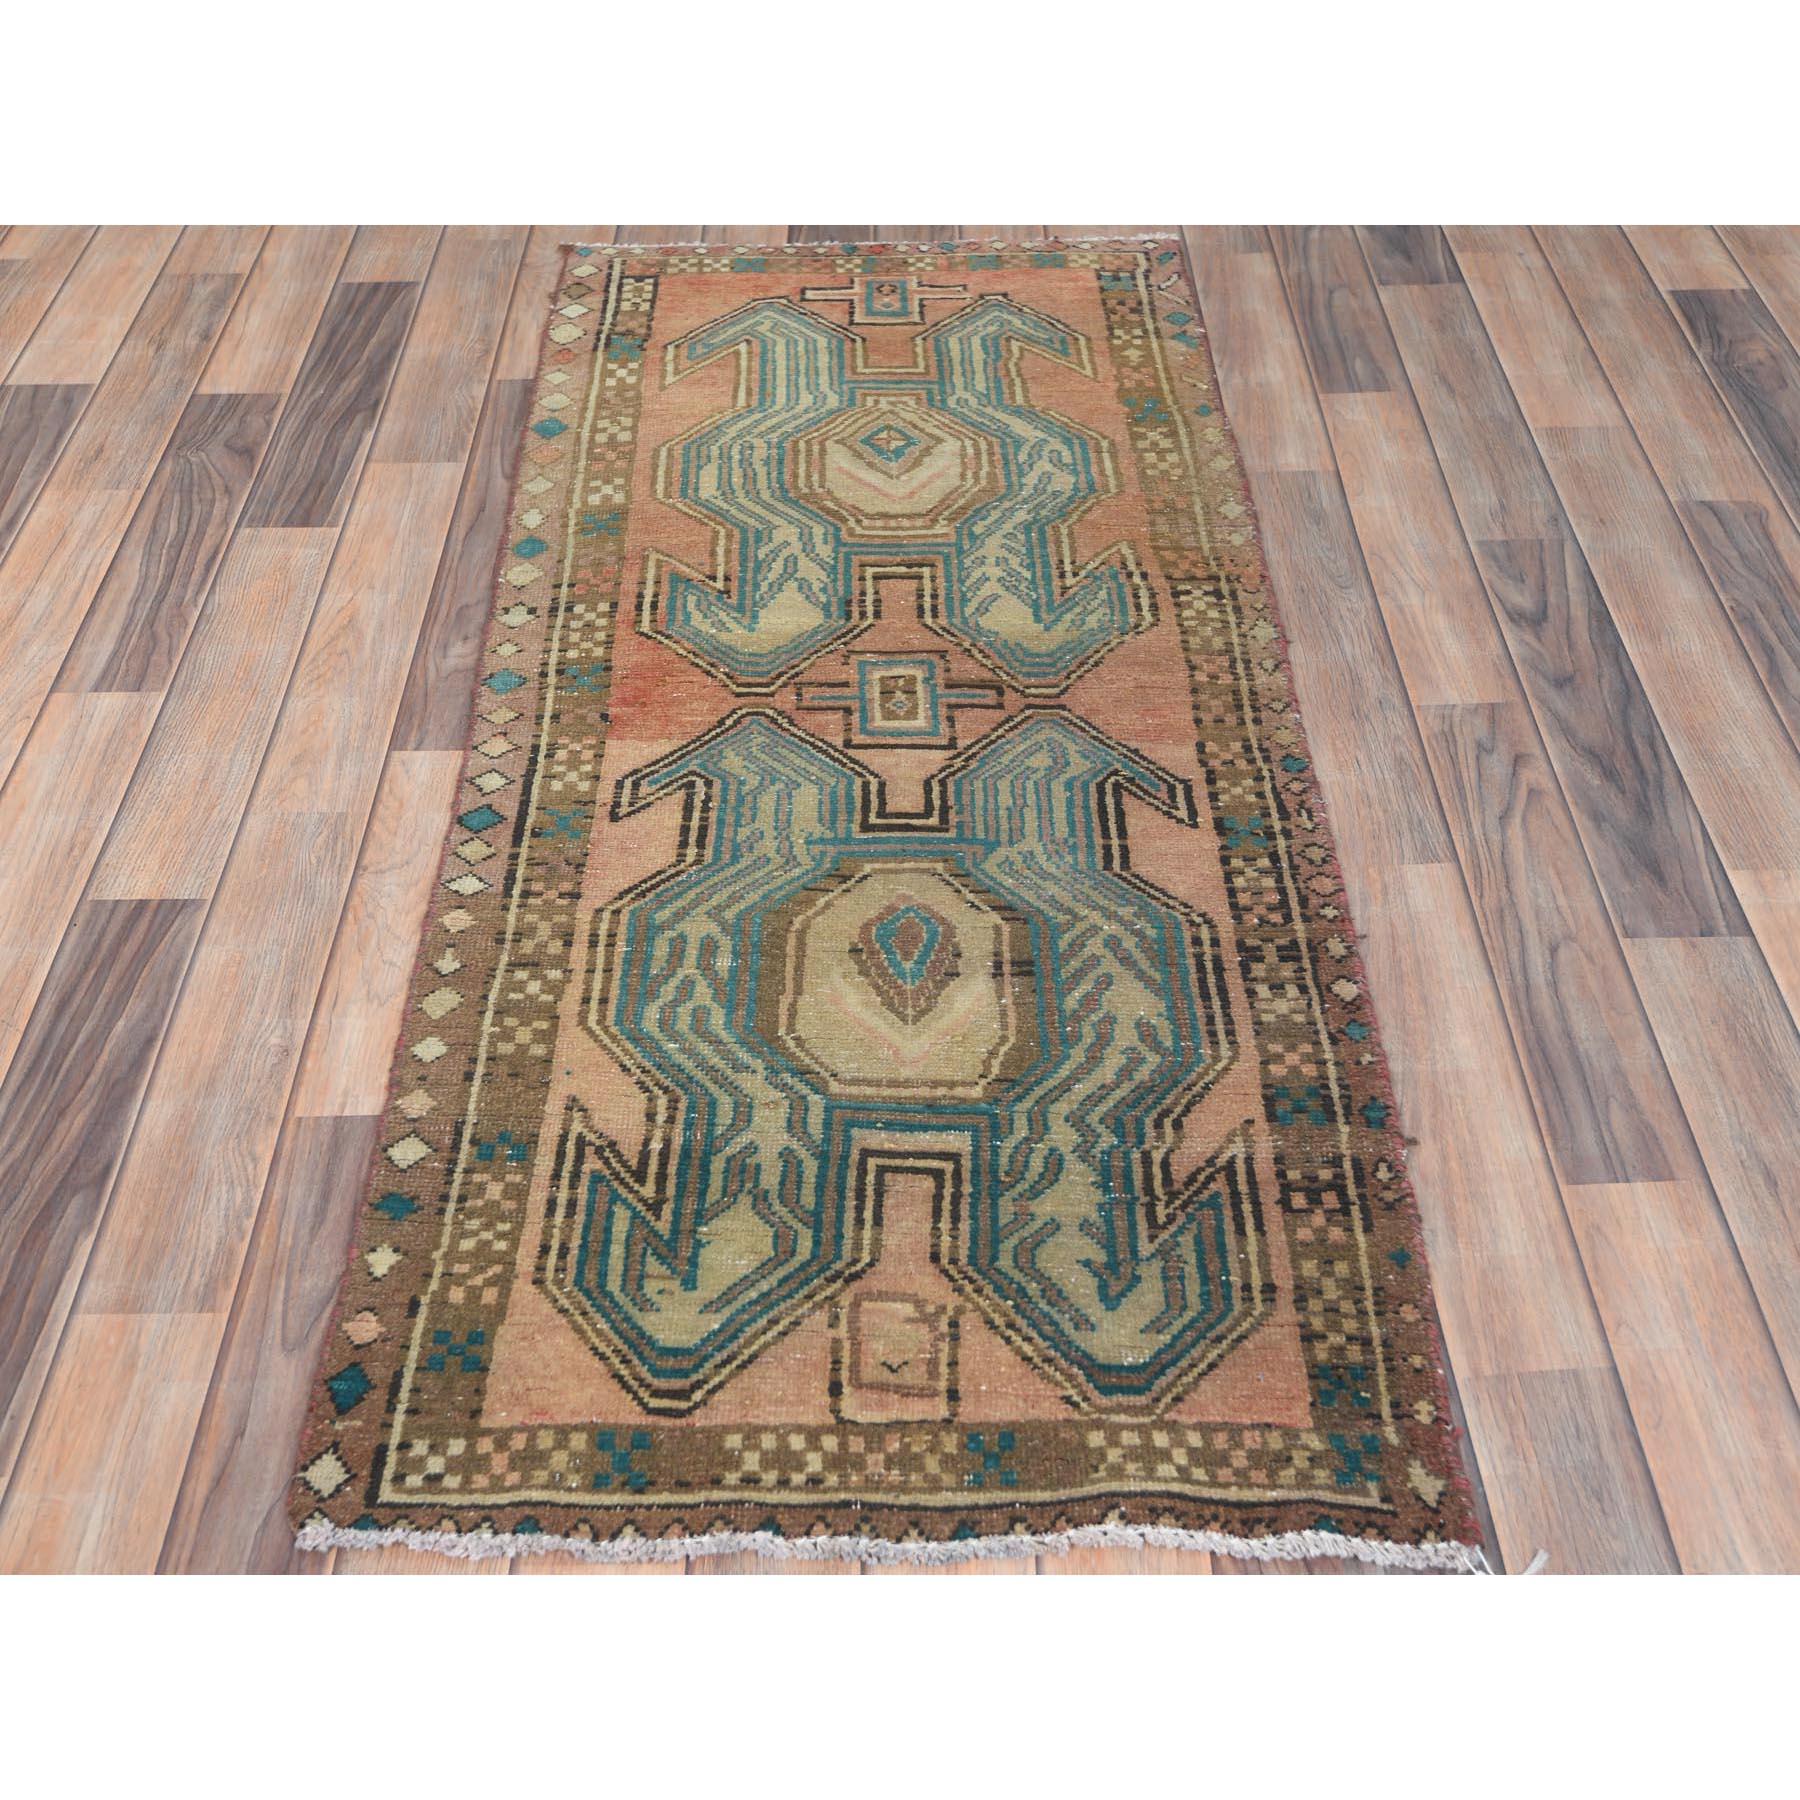 This fabulous Hand-Knotted carpet has been created and designed for extra strength and durability. This rug has been handcrafted for weeks in the traditional method that is used to make
Exact Rug Size in Feet and Inches : 2'2